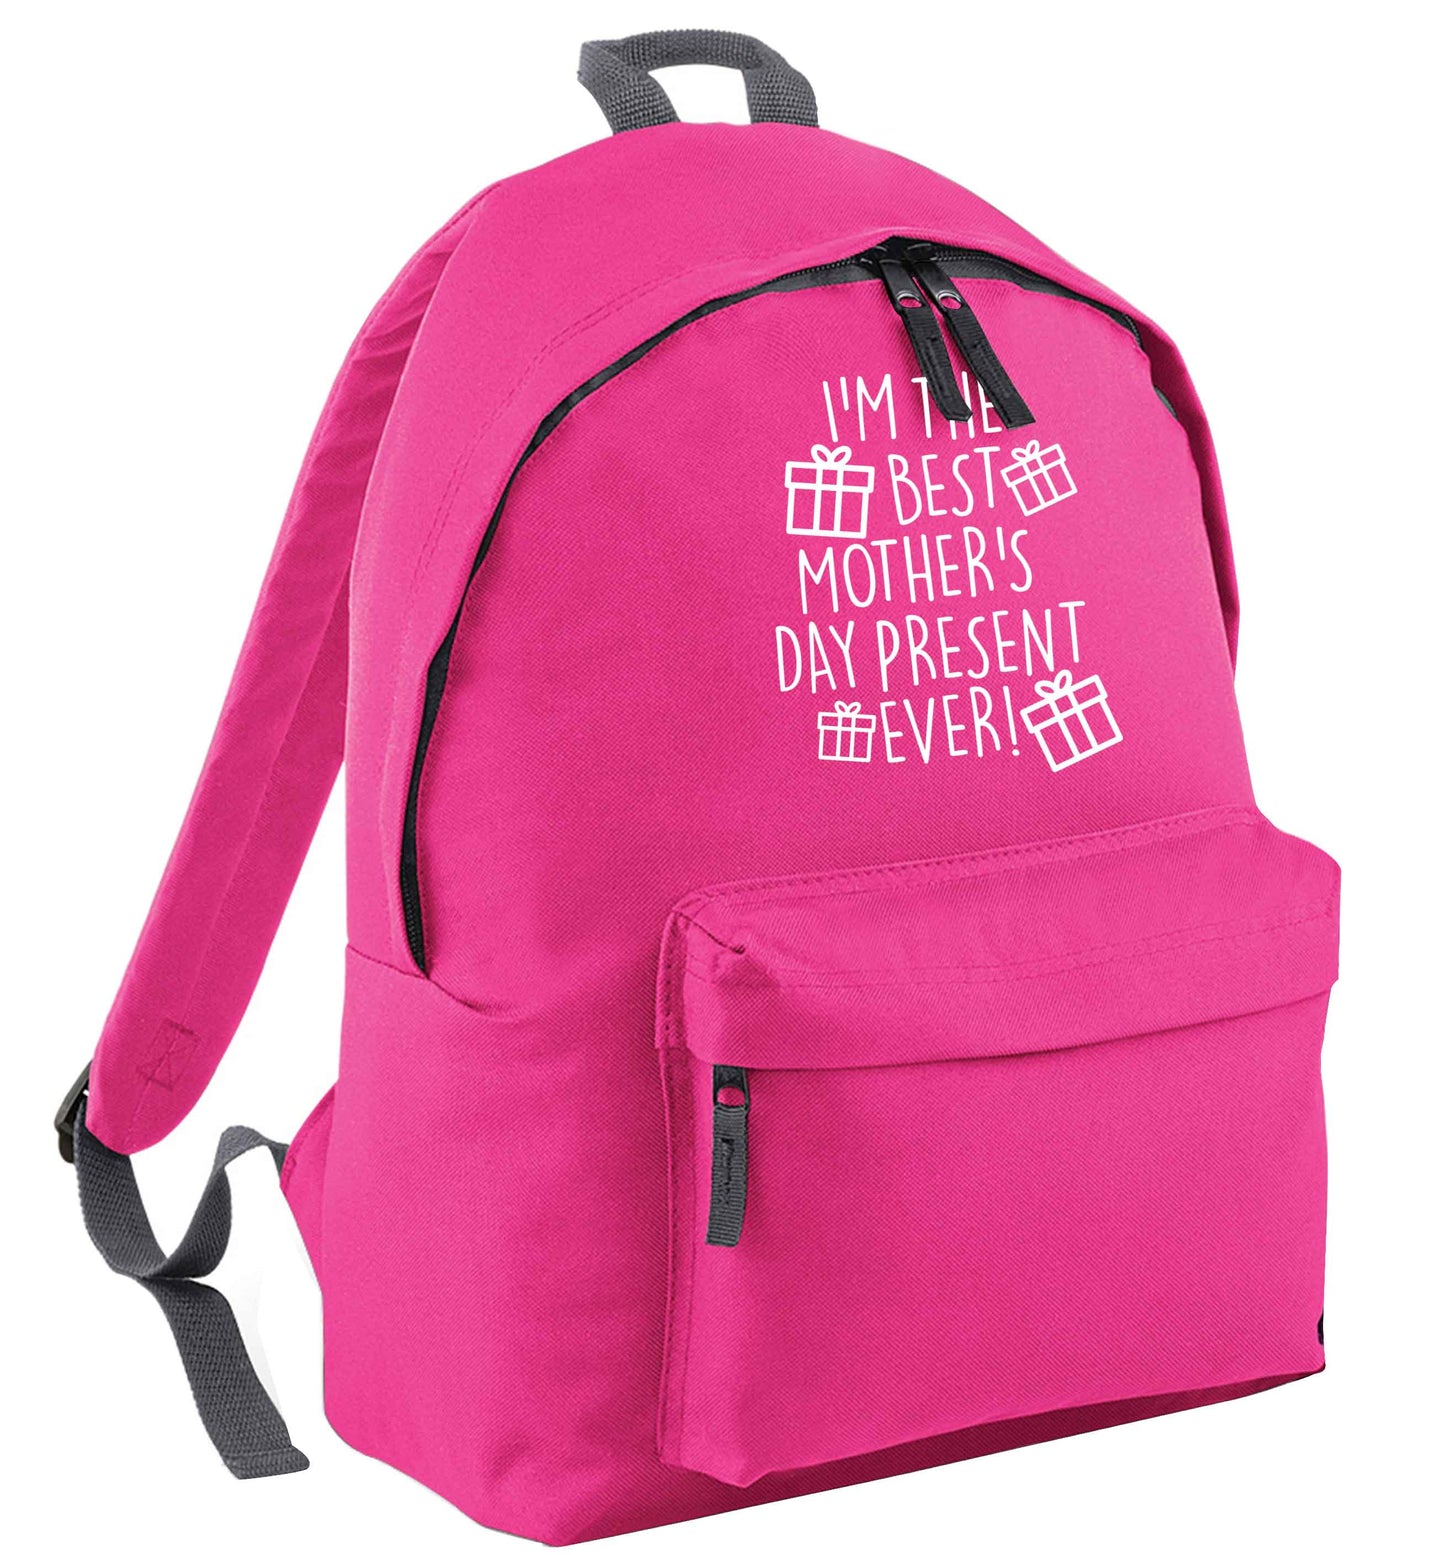 I'm the best mother's day present ever! pink childrens backpack